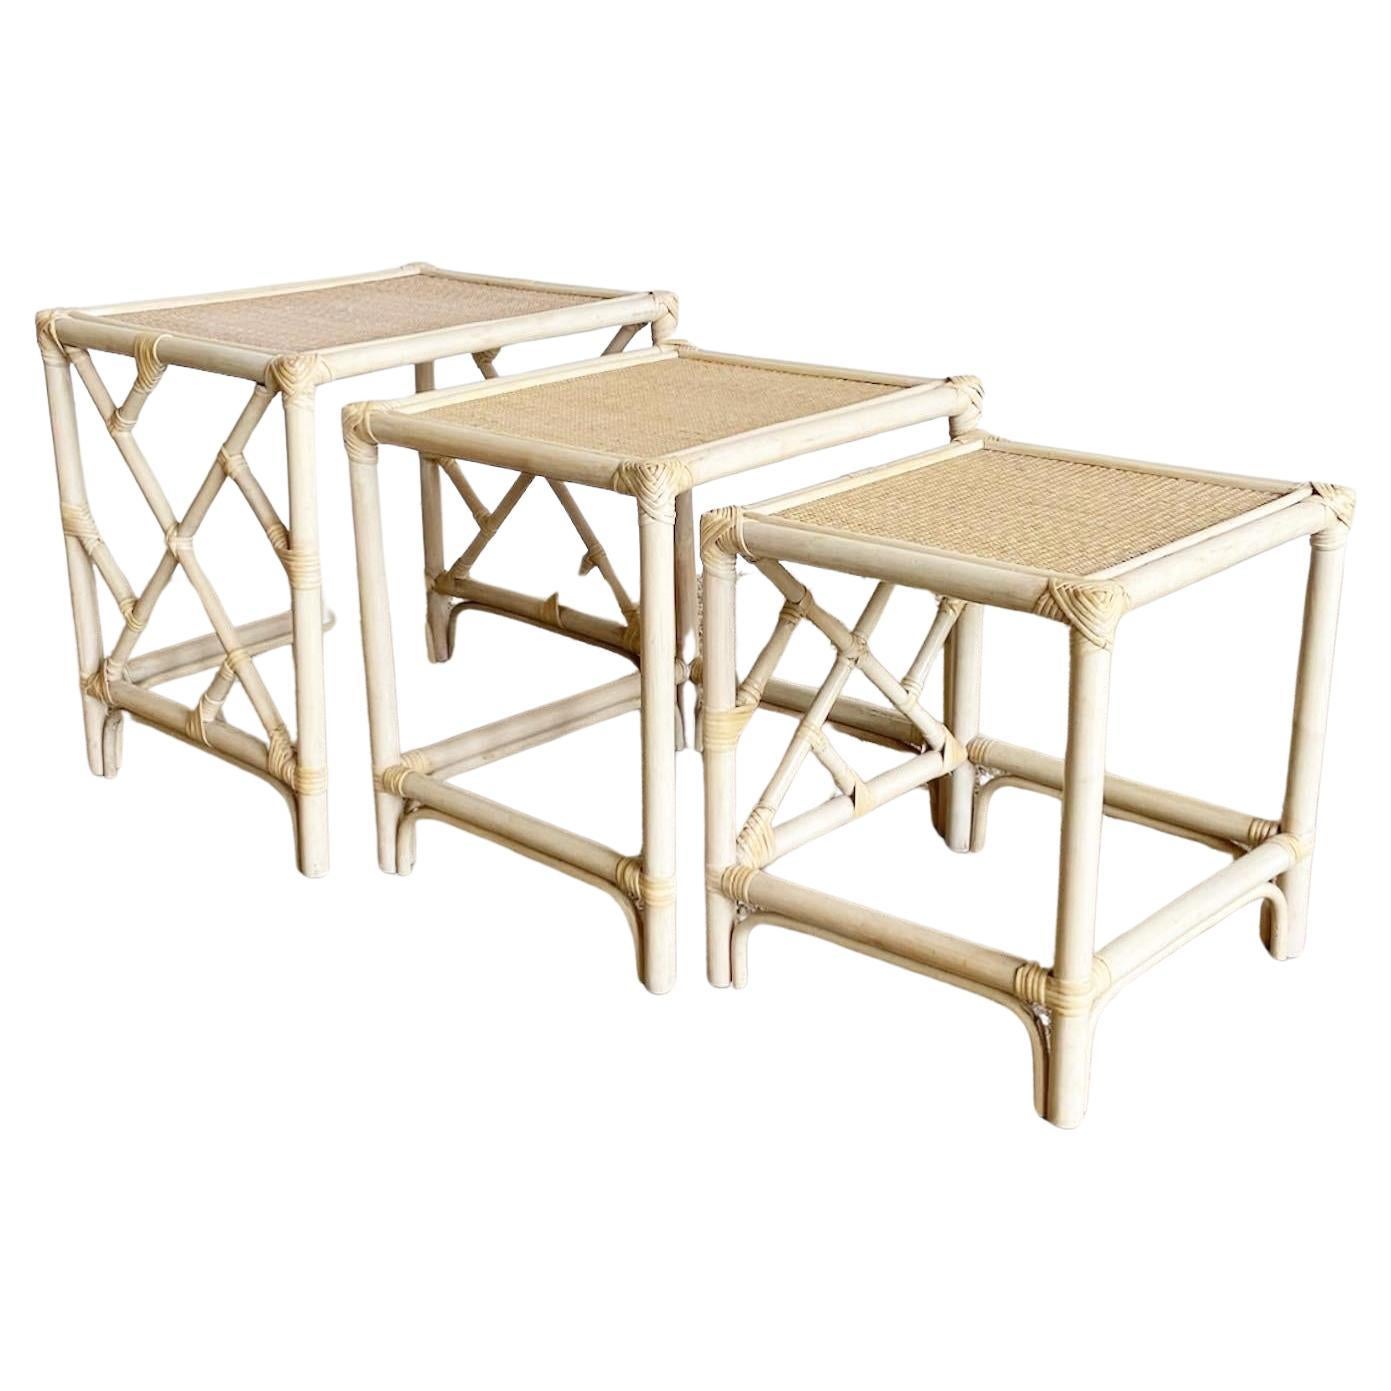 Boho Chic Bamboo Rattan Chippendale Style Nesting Tables - Set of 3 For Sale